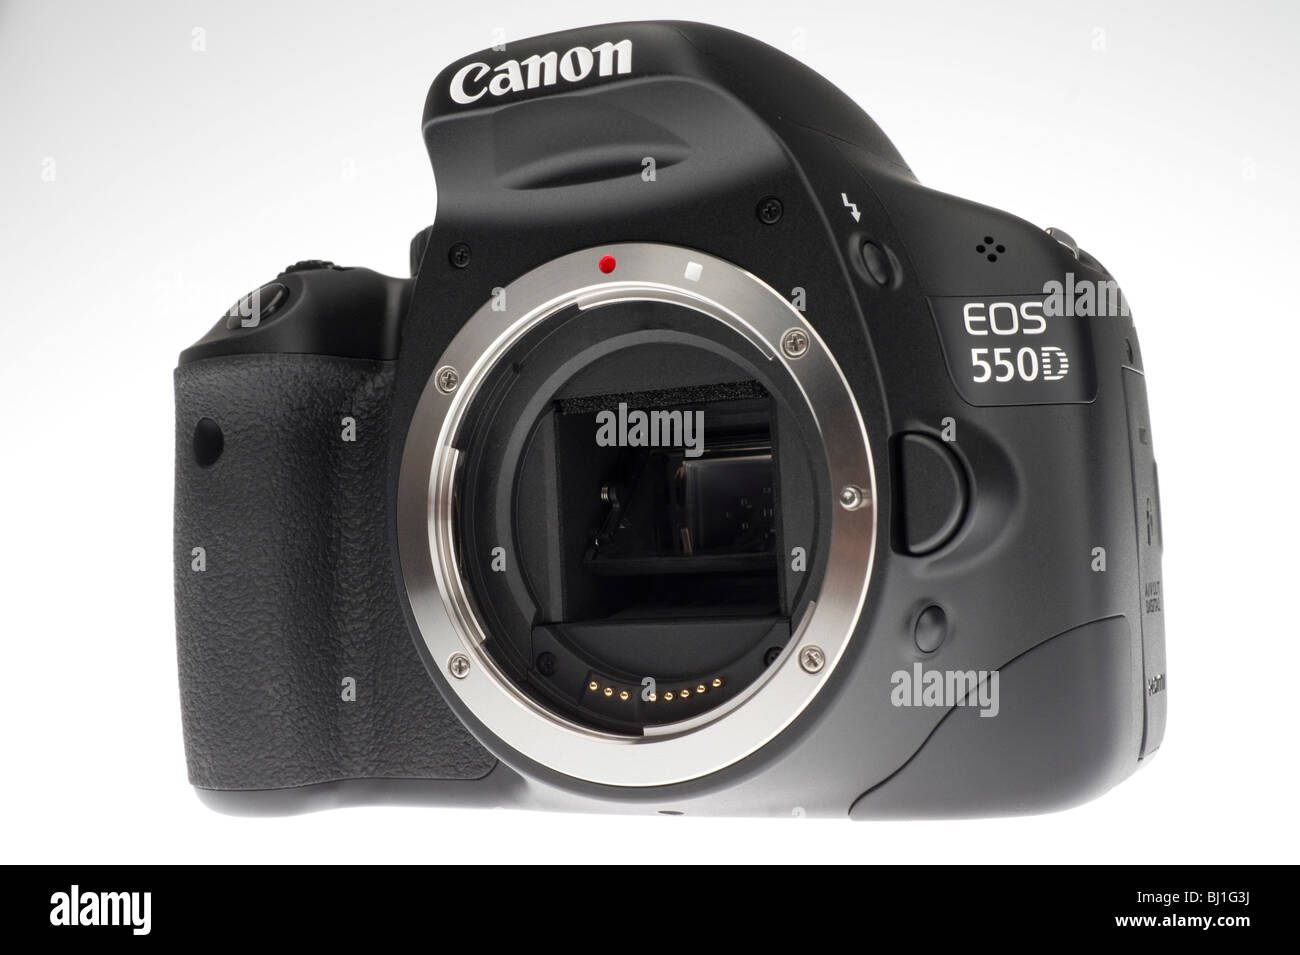 Canon EOS 550D or Digital Rebel 2Ti digital SLR camera with movie function March 2010. Body only with lens removed. Stock Photo